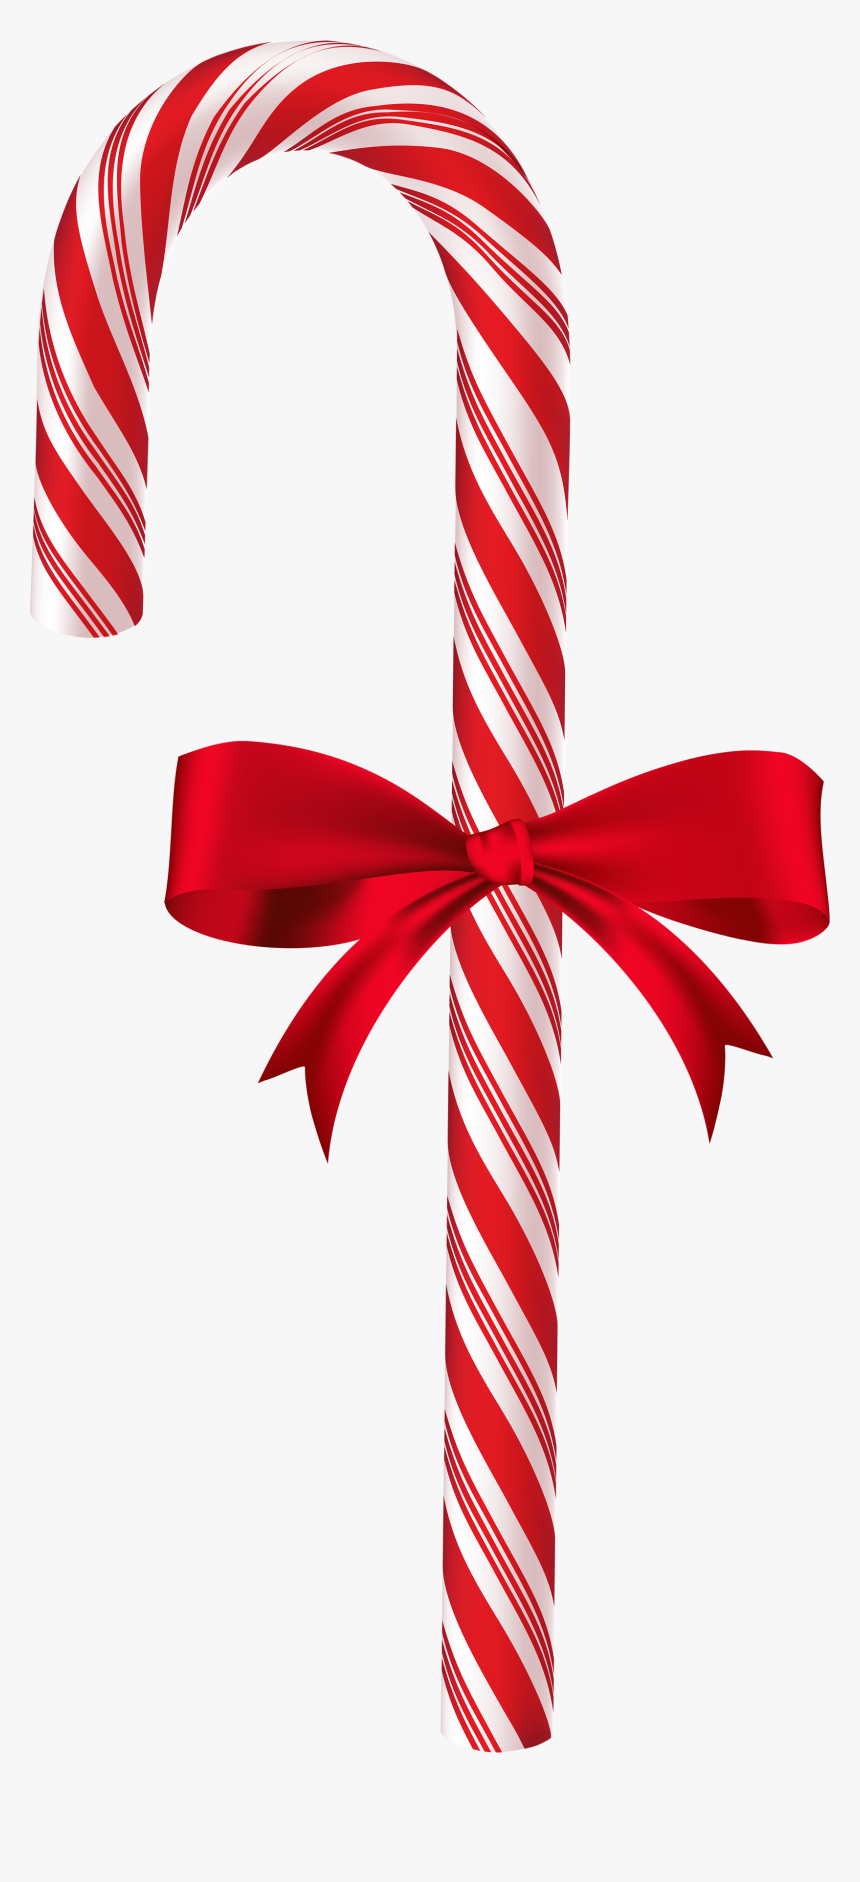 Candy Cane Png No Background - Transparent Candy Cane Png, Png Download, Free Download